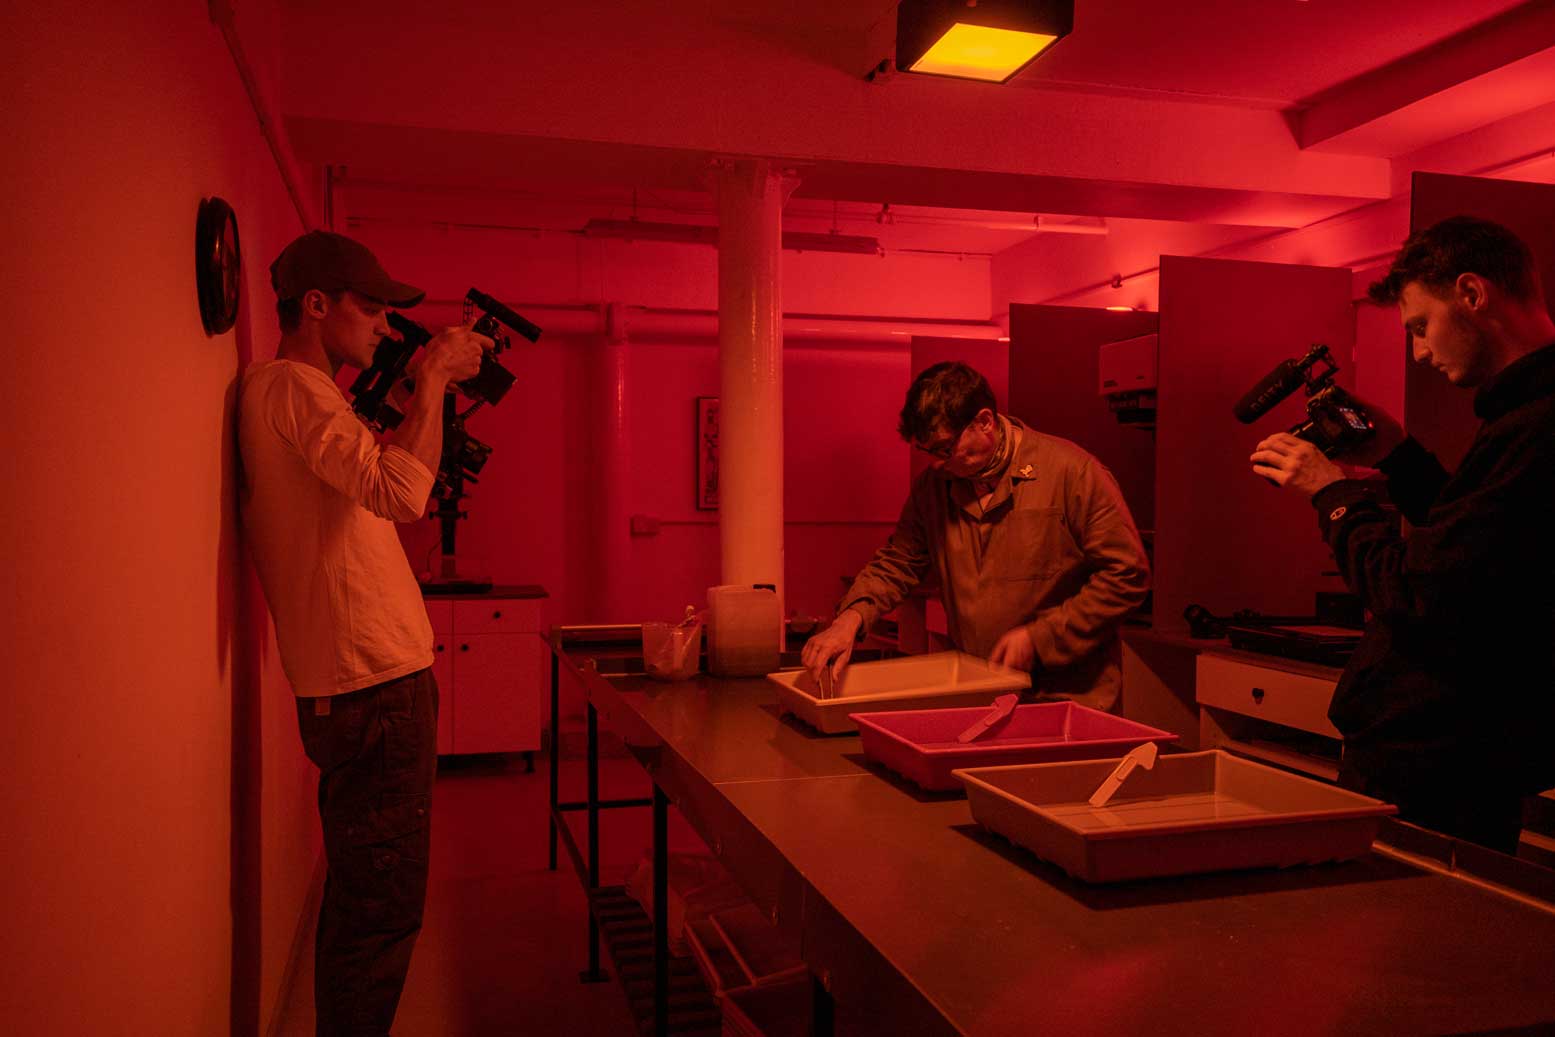 Artist working in a darkroom. Two men are filming what he does. Credit 2B13 Productions.